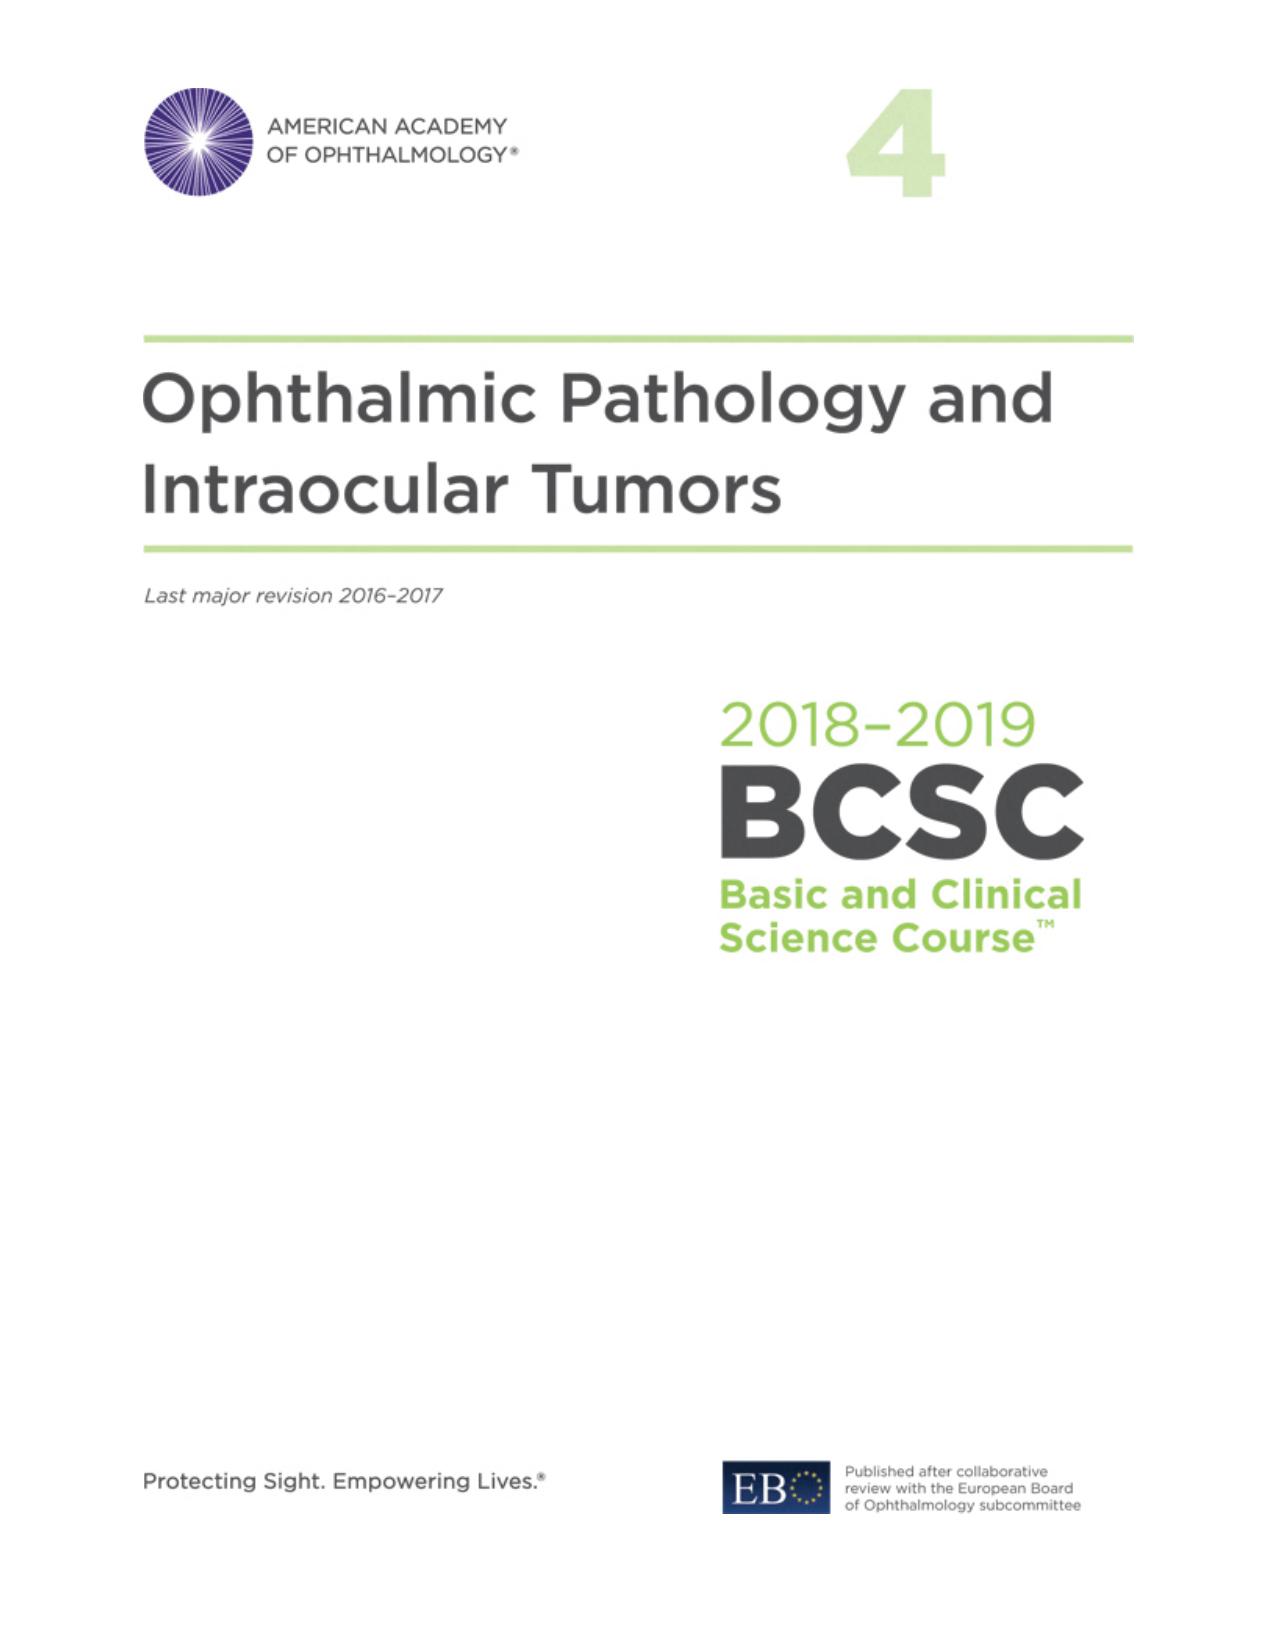 (eBook PDF)2018-2019 BCSC (Basic and Clinical Science Course), Section 04 Ophthalmic Pathology and Intraocular Tumors by American Academy of Ophthalmology